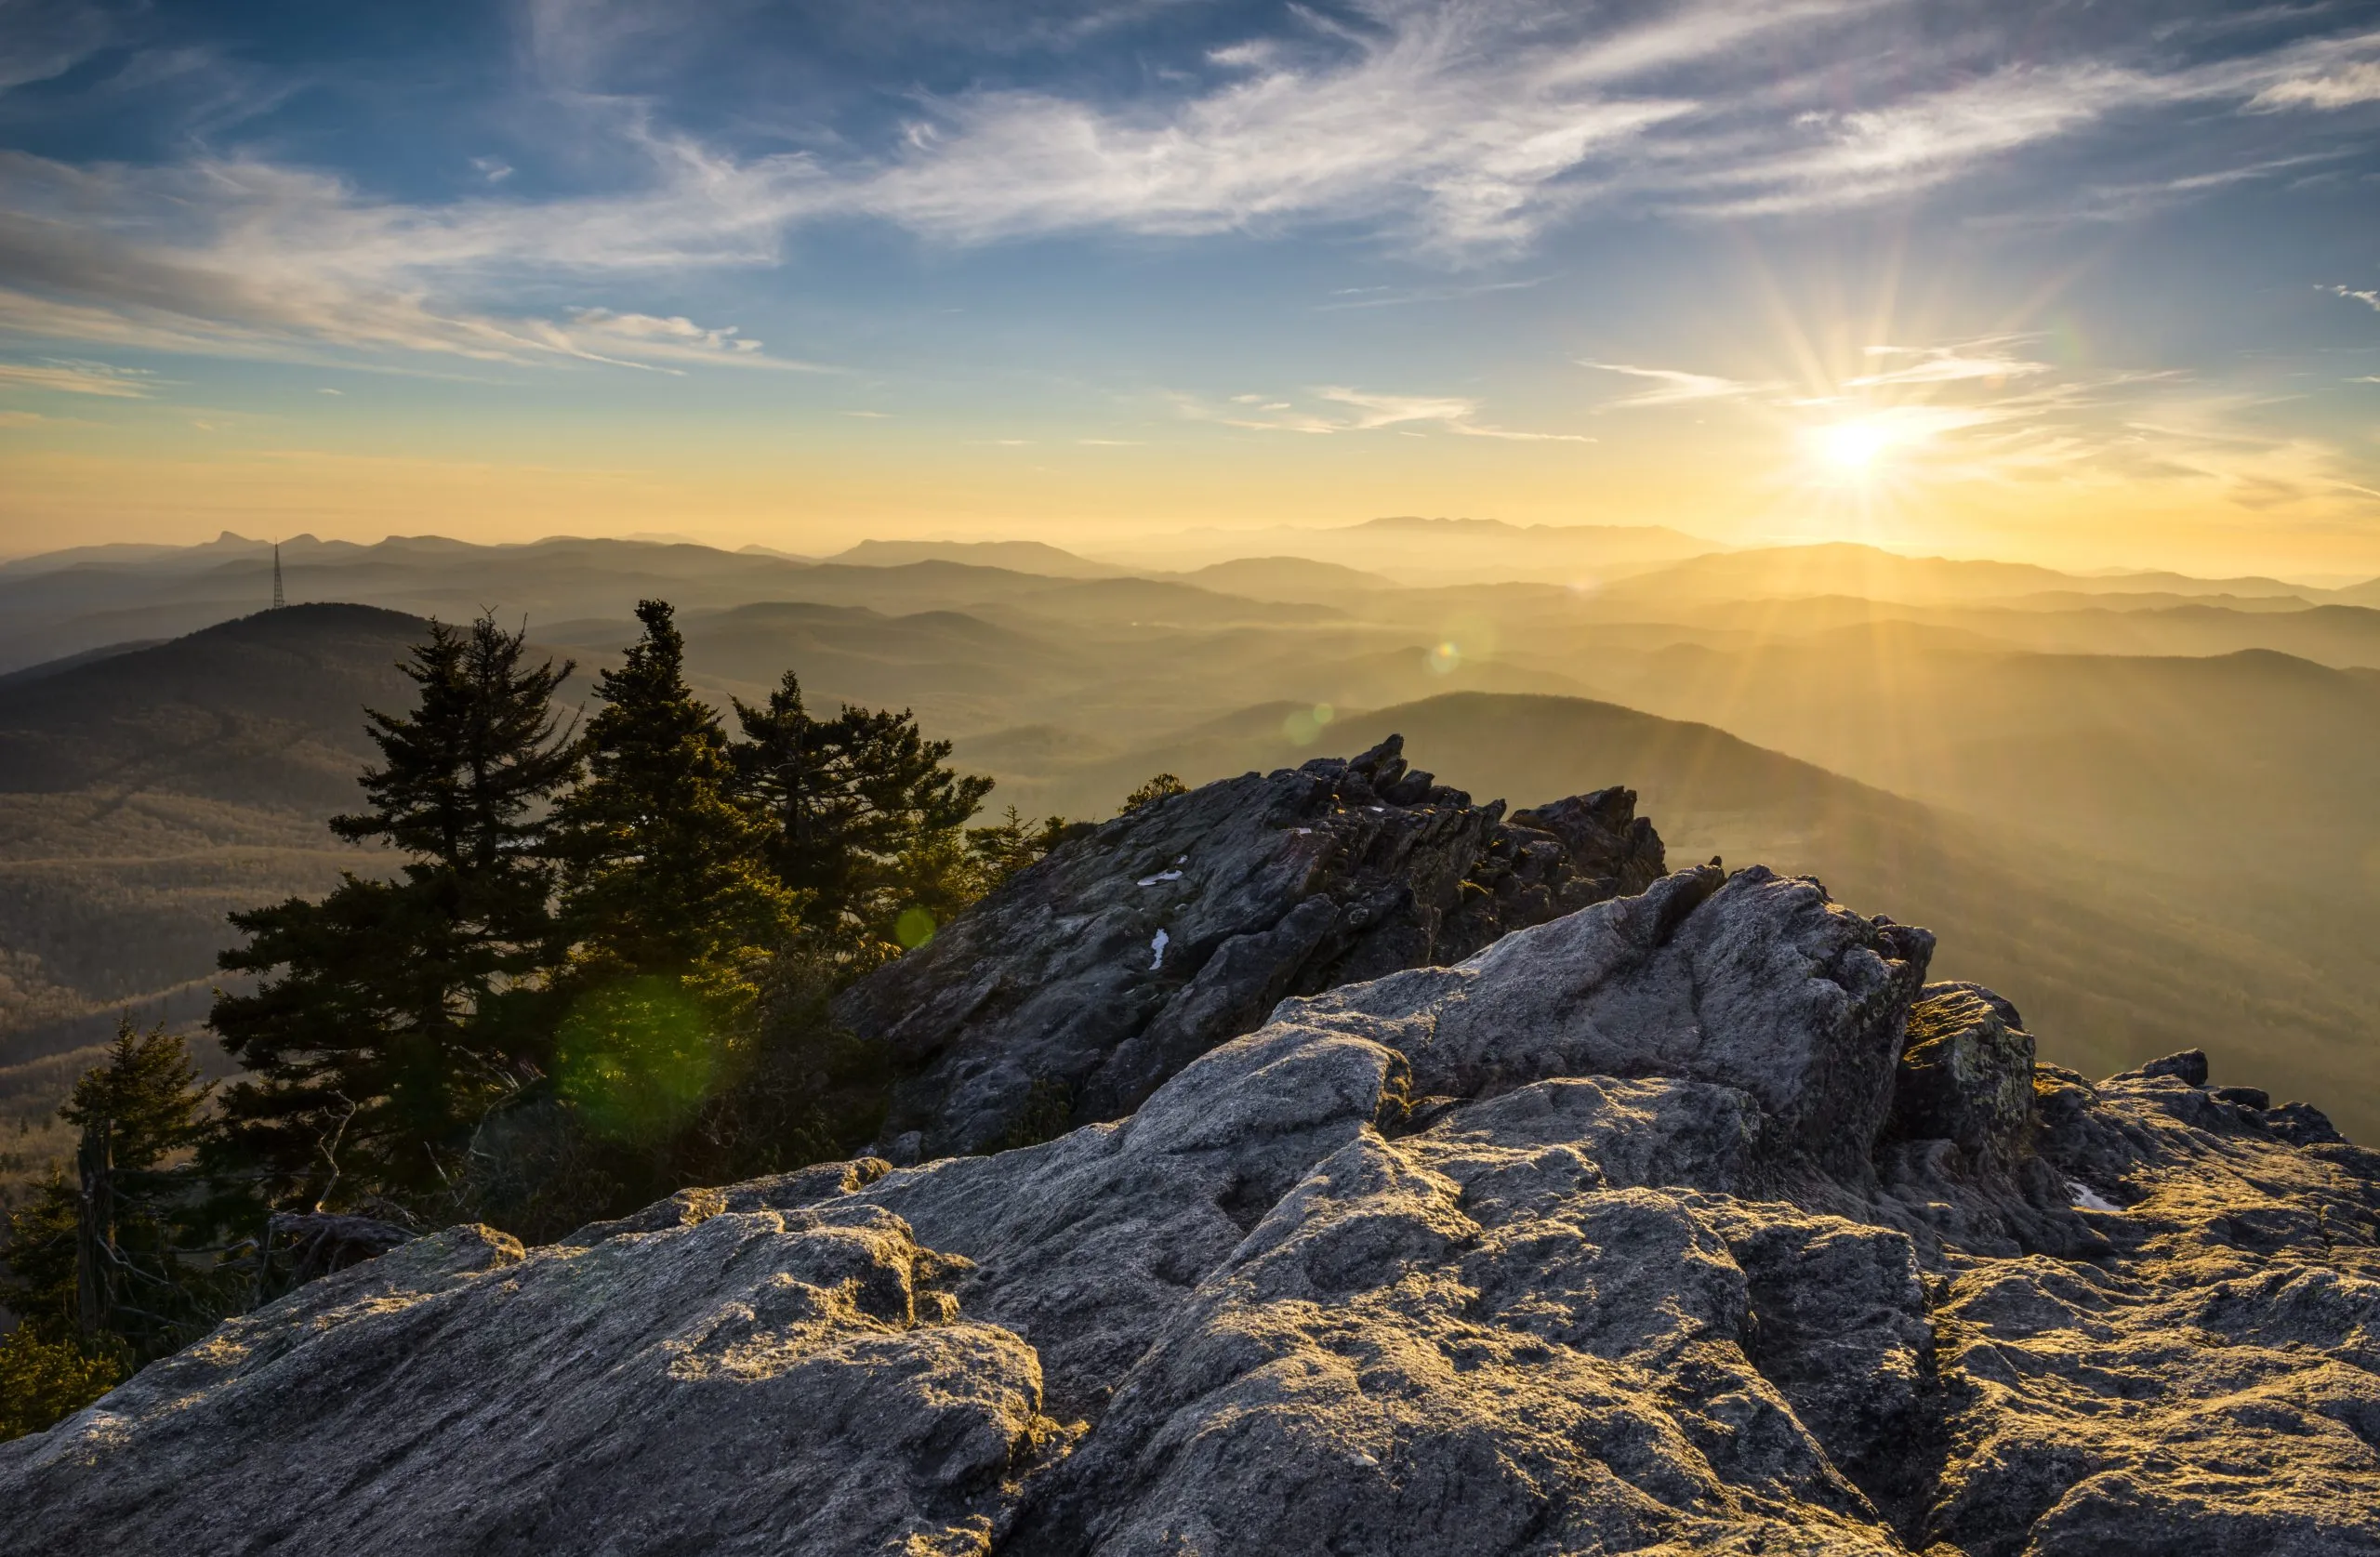 sunset view from grandfather mountain, near the best mountain towns in north carolina